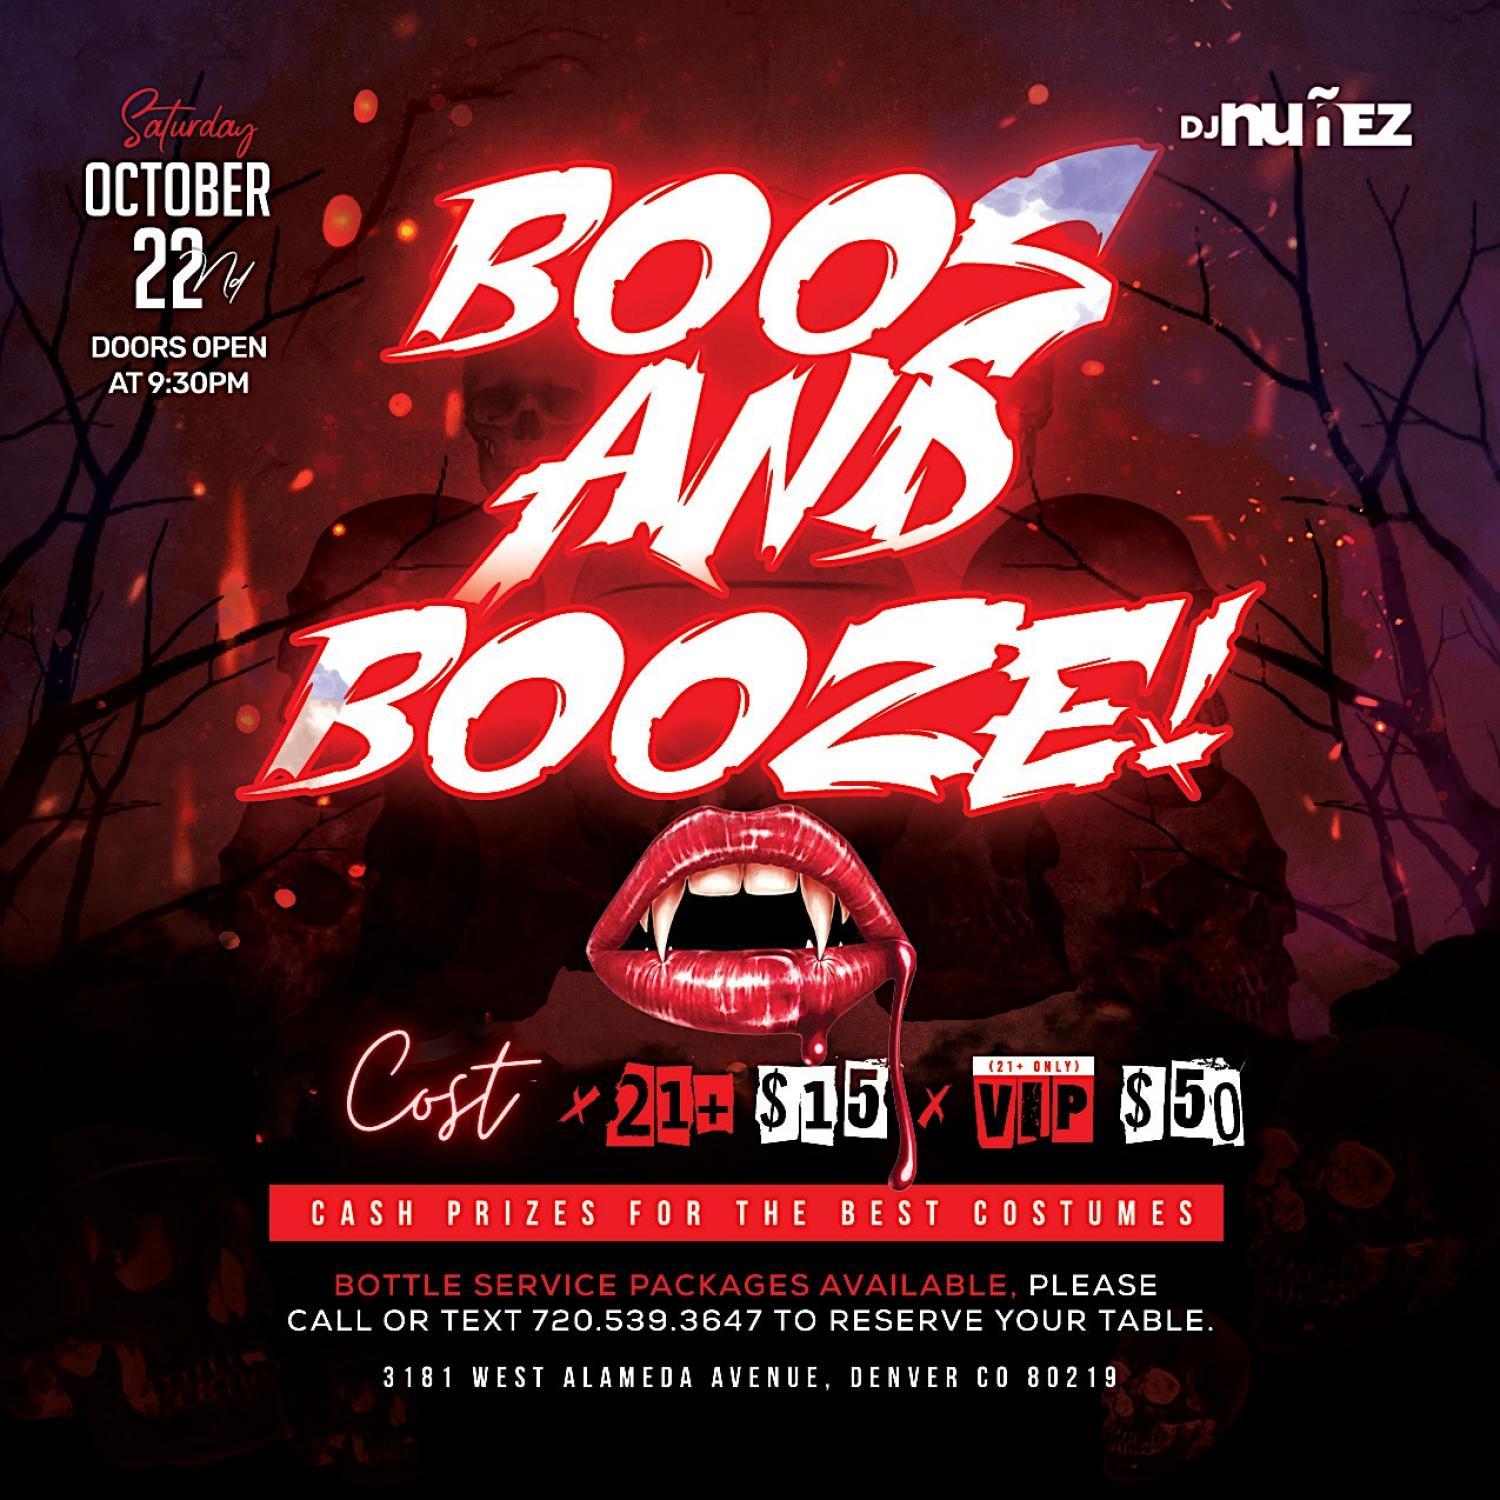 Boos and Booze: Halloween Party
Sat Oct 22, 7:00 PM - Sun Oct 23, 2:00 AM
in 2 days